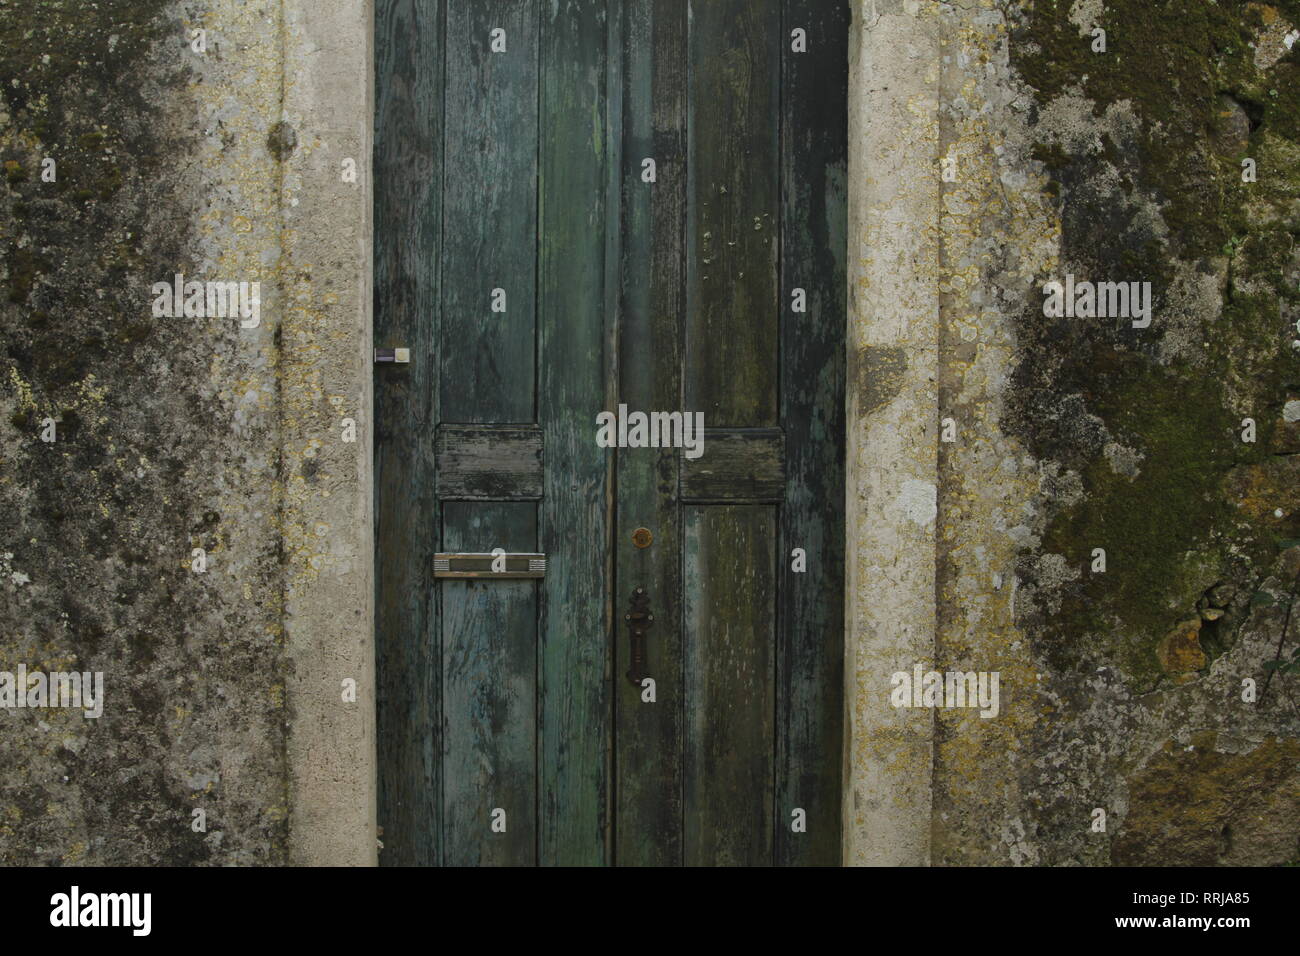 Old green/teal weather door with lichen covered concrete walls, Sintra, Portugal Stock Photo